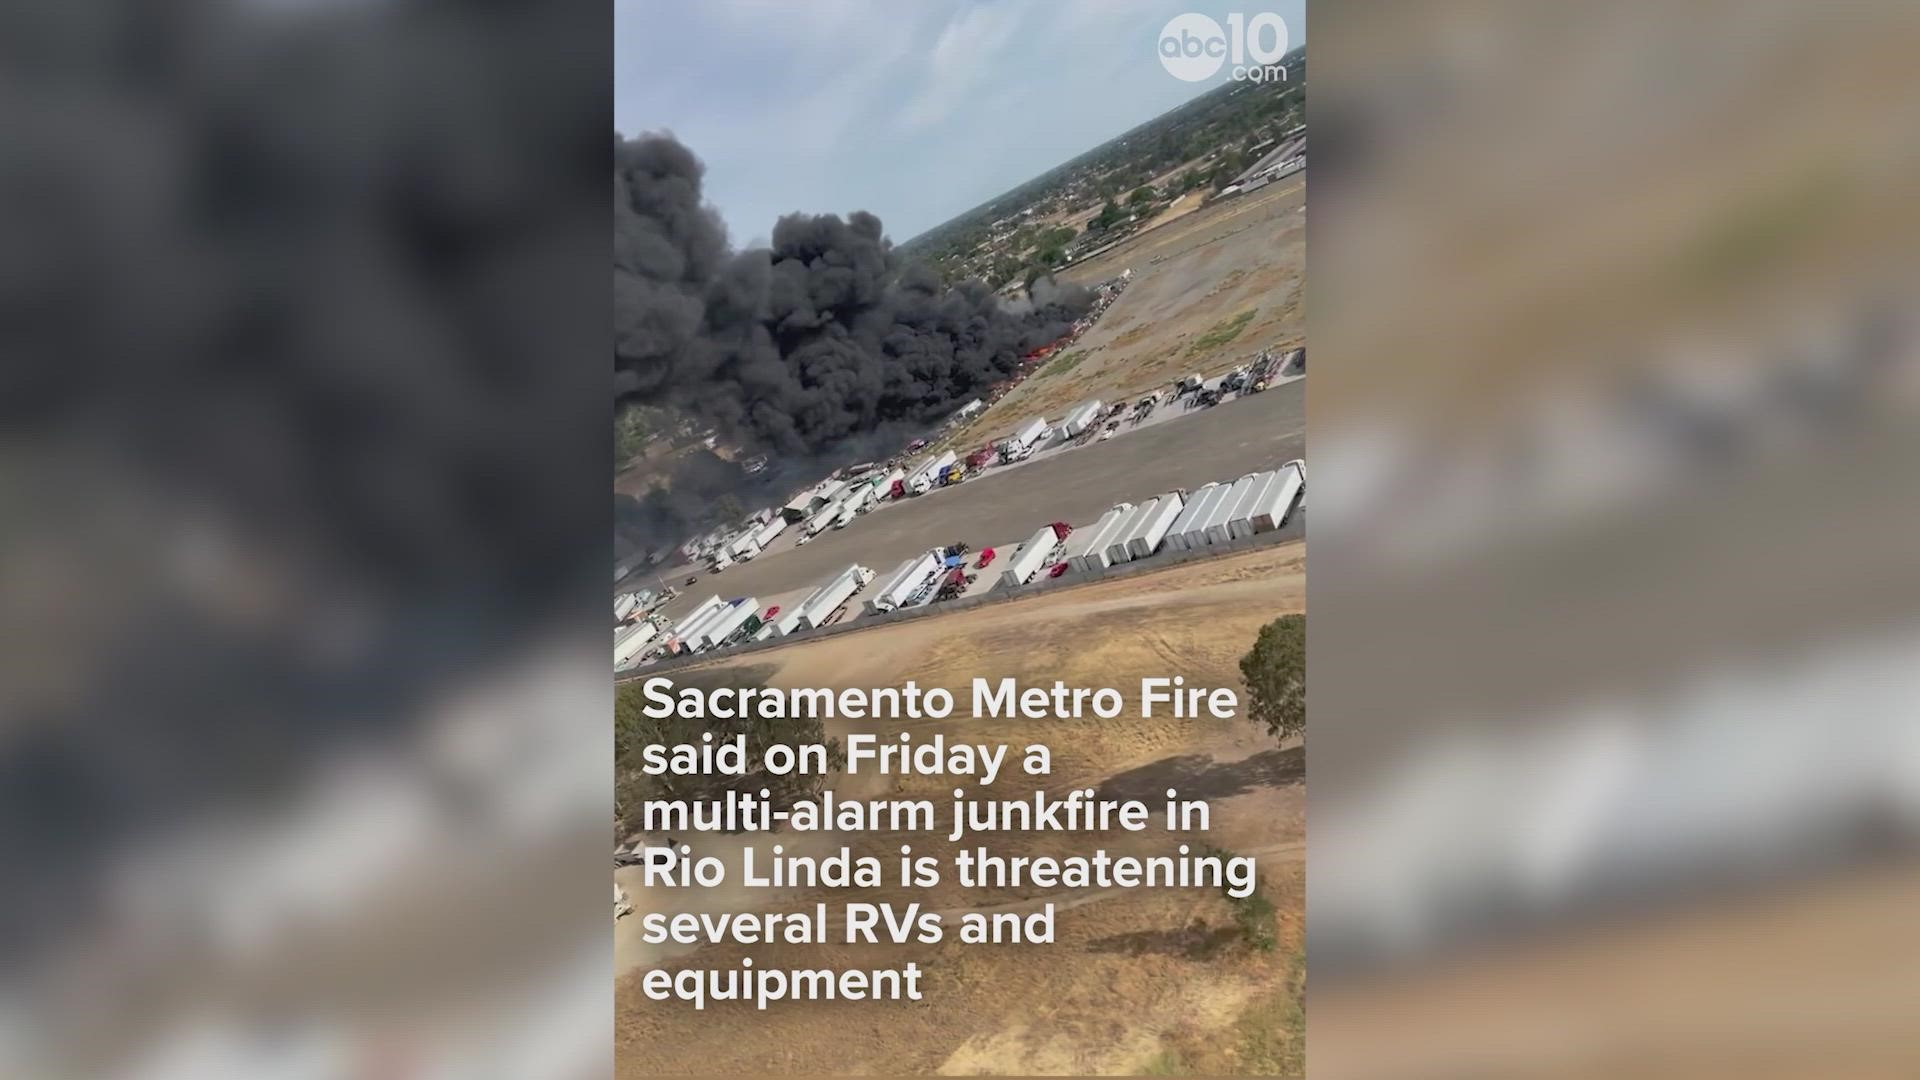 According to the Sacramento Metropolitan Fire District, no structures are being threatened by the fire, though multiple RVs and other equipment are at risk.